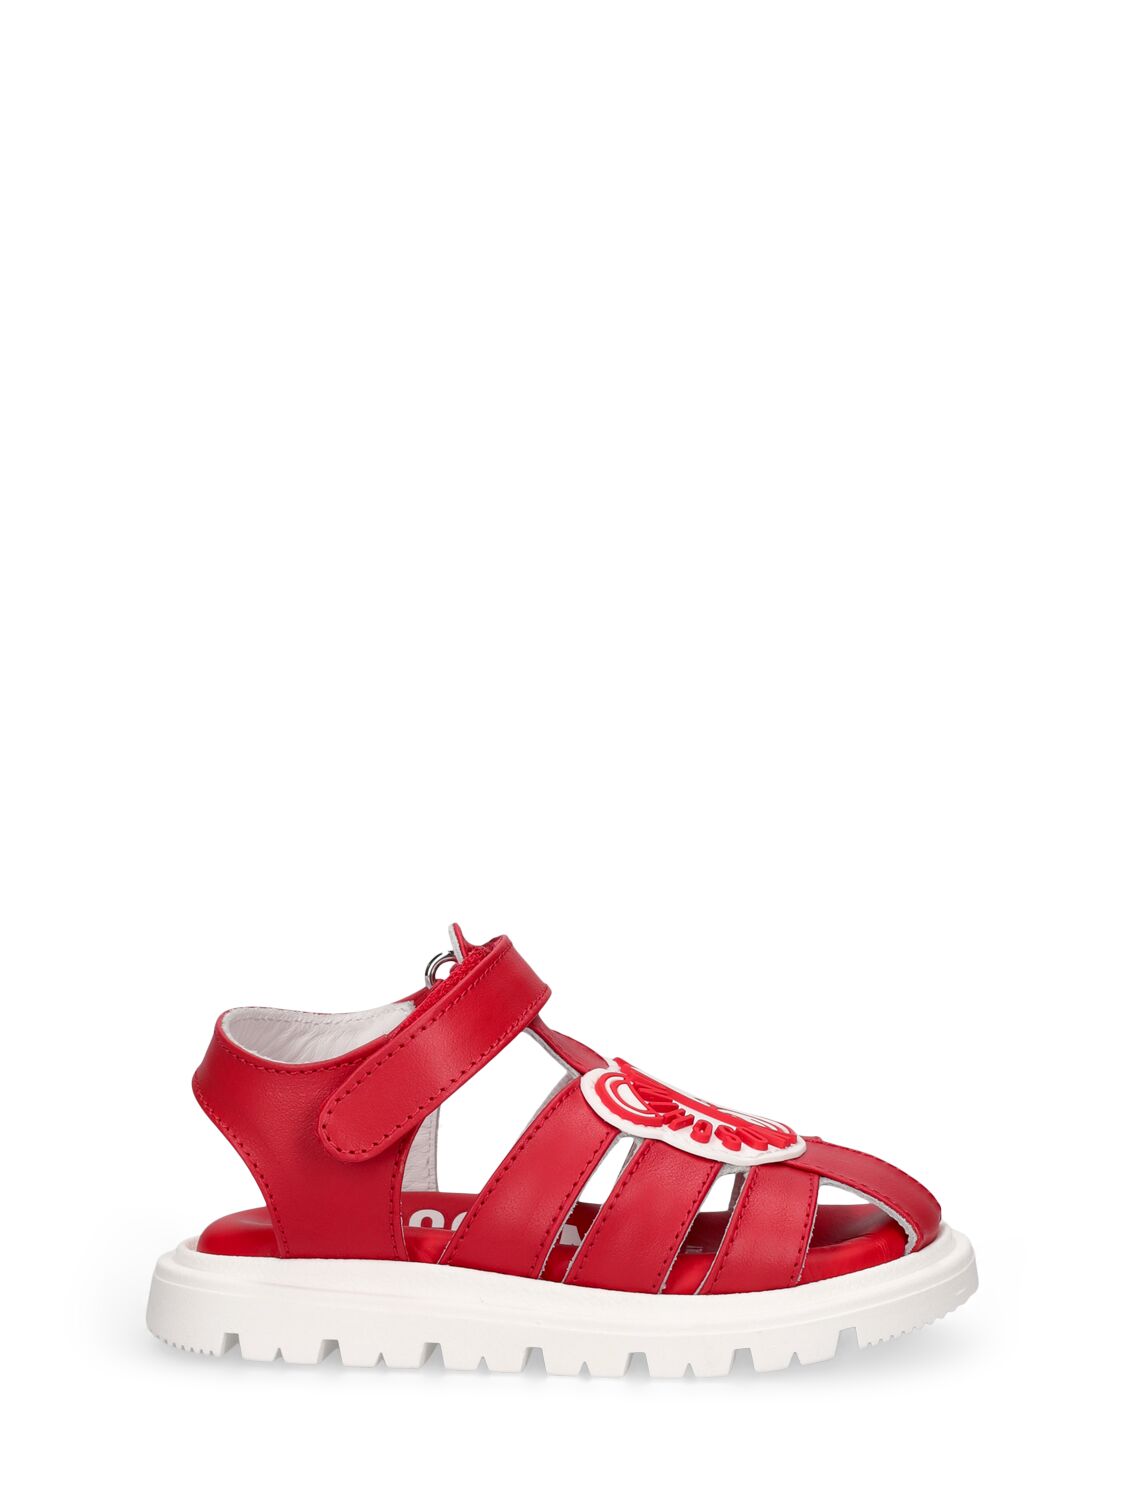 Moschino Kids' Logo Print Leather Sandals W/teddy Patch In Red